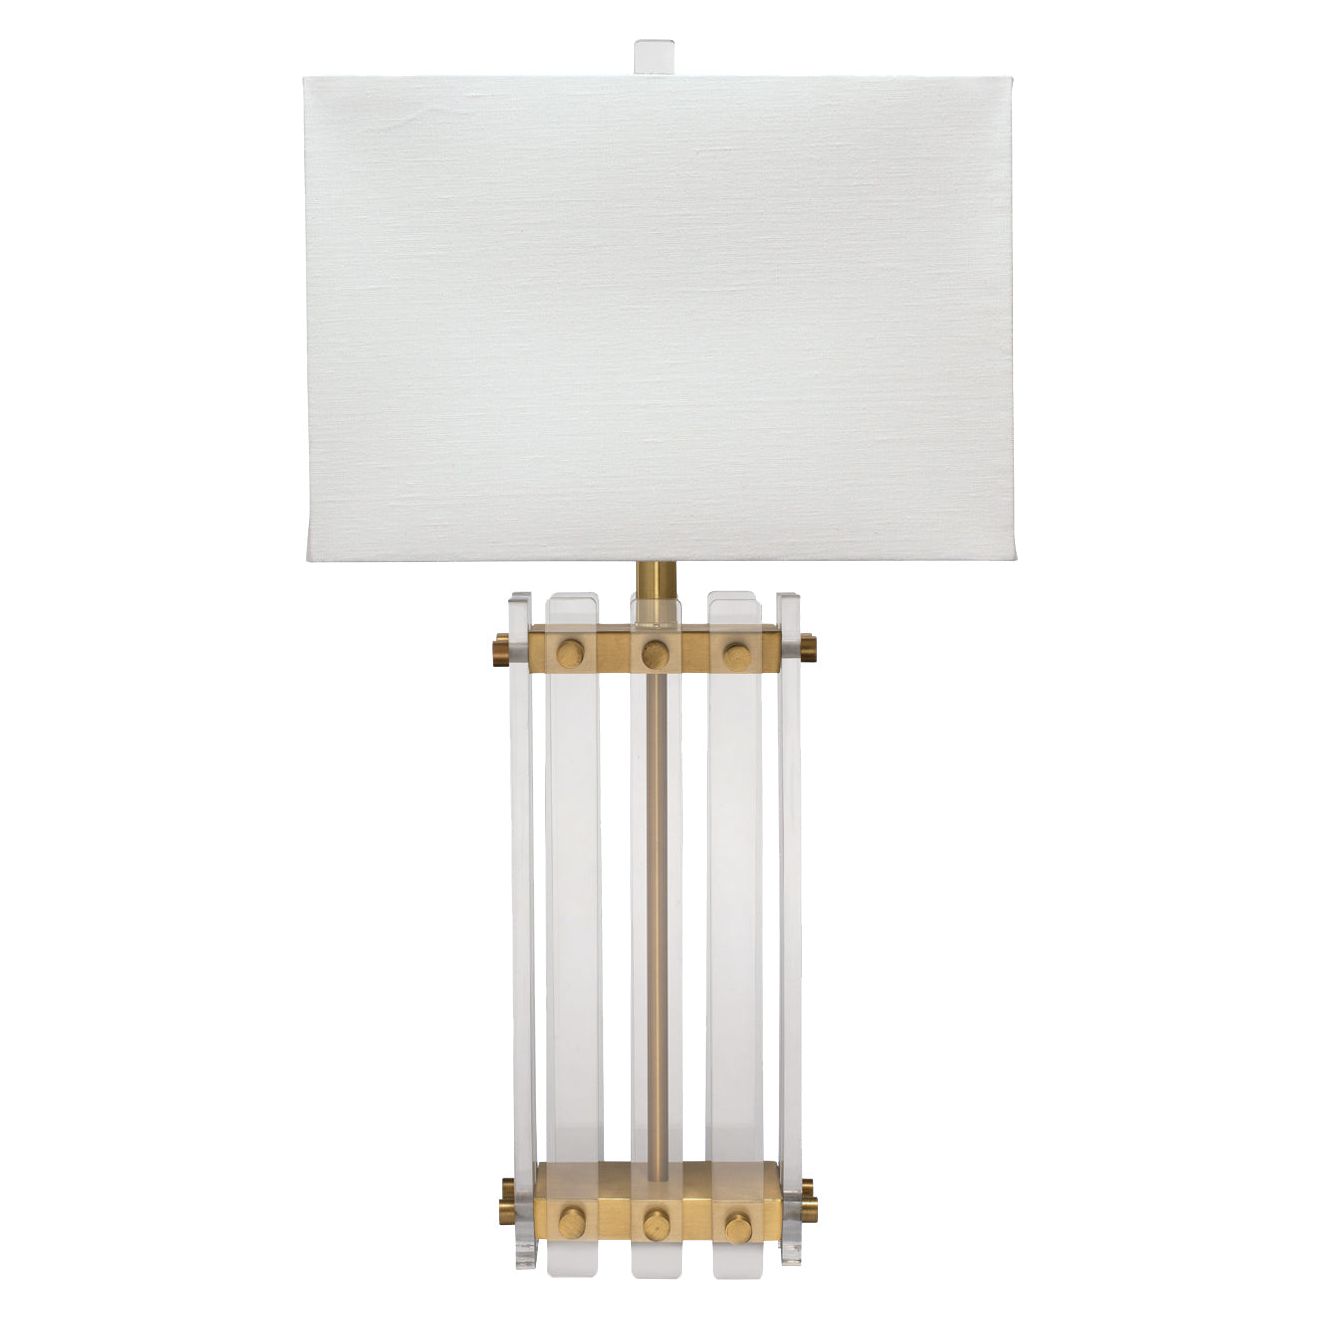 Jamie Young Company - 9GRAMMERTLAB - Grammercy Table Lamp - Grammercy - Clear